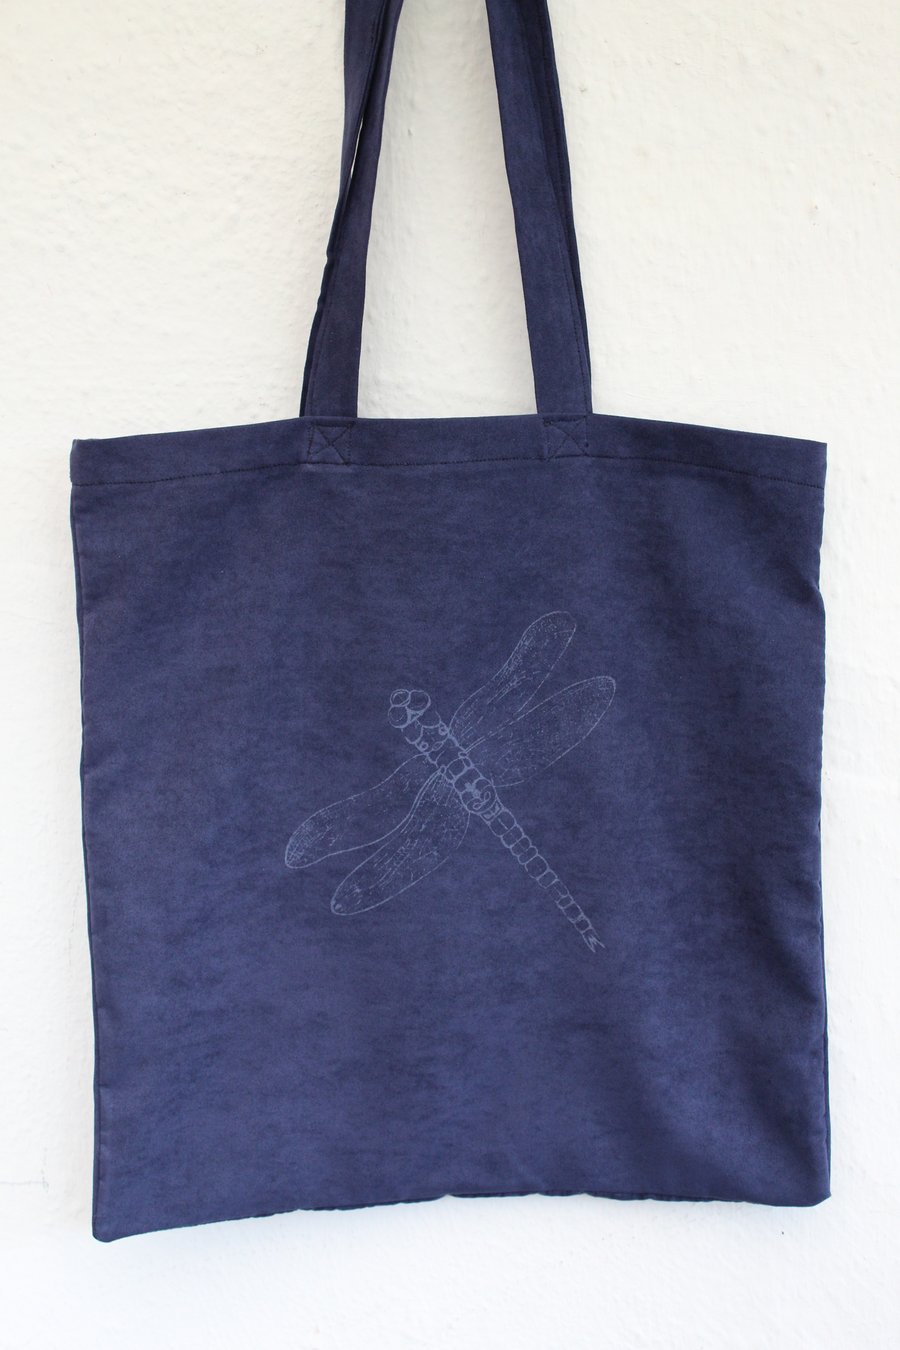 Handmade blue up cycled suede effect Tote bag,dragonfly screen print Bag,gift